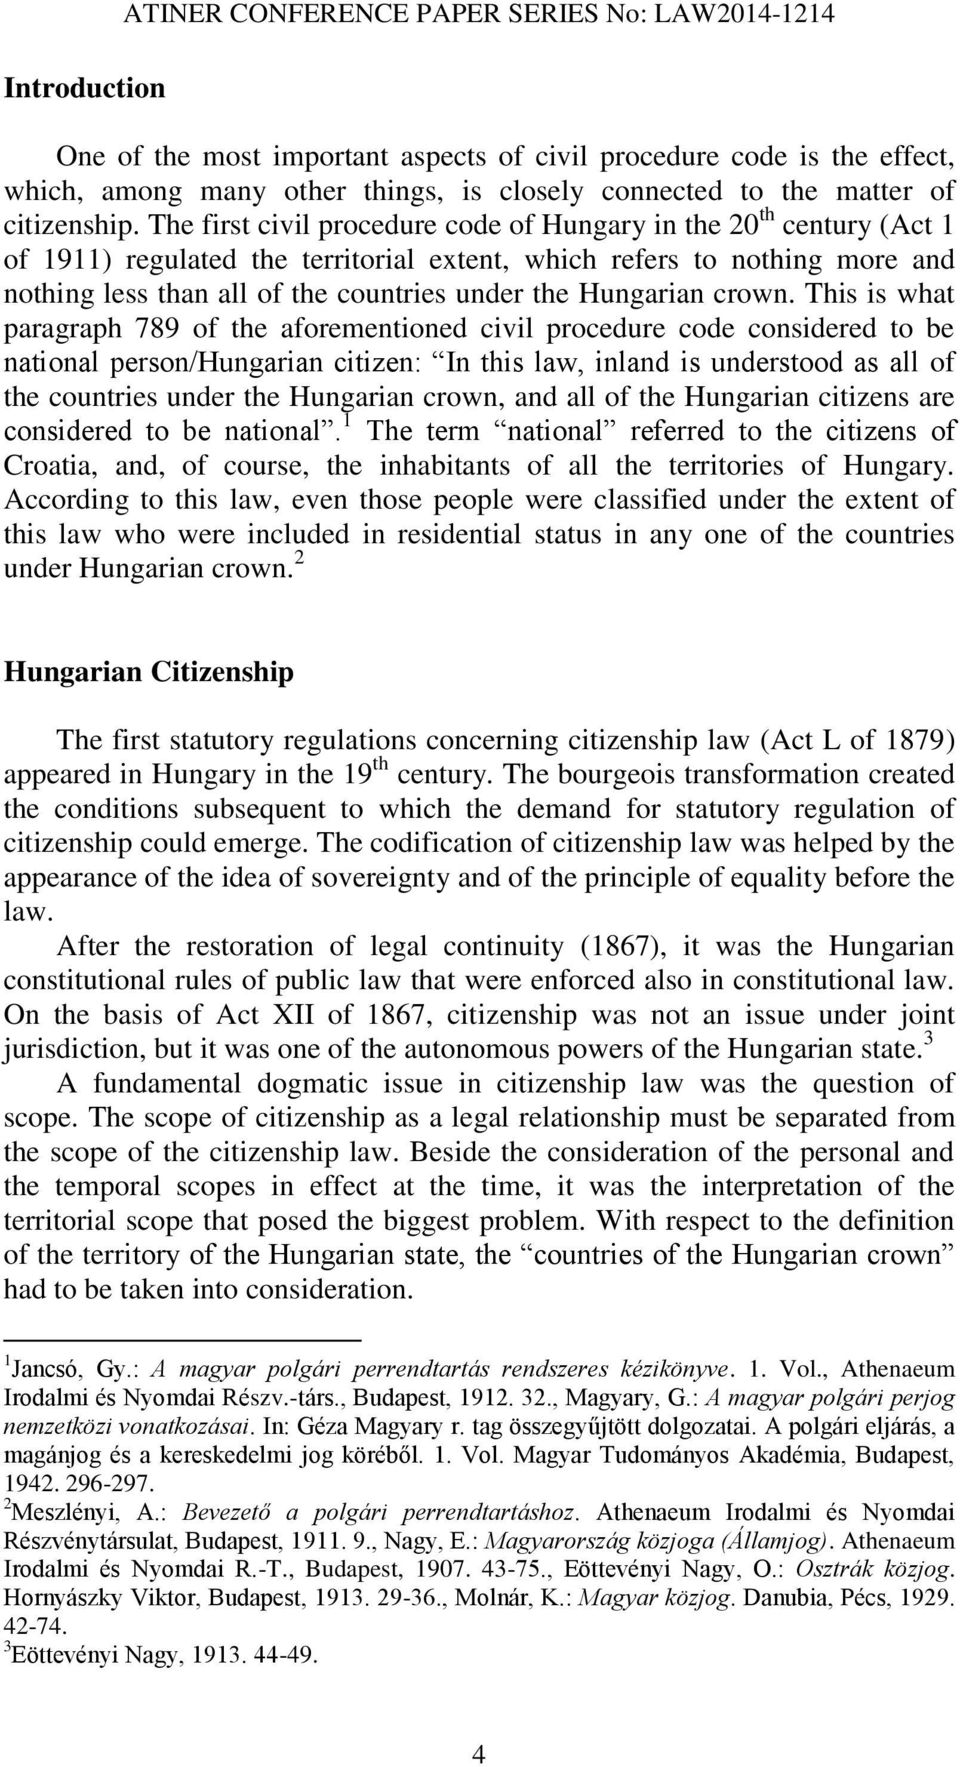 The first civil procedure code of Hungary in the 20 th century (Act 1 of 1911) regulated the territorial extent, which refers to nothing more and nothing less than all of the countries under the